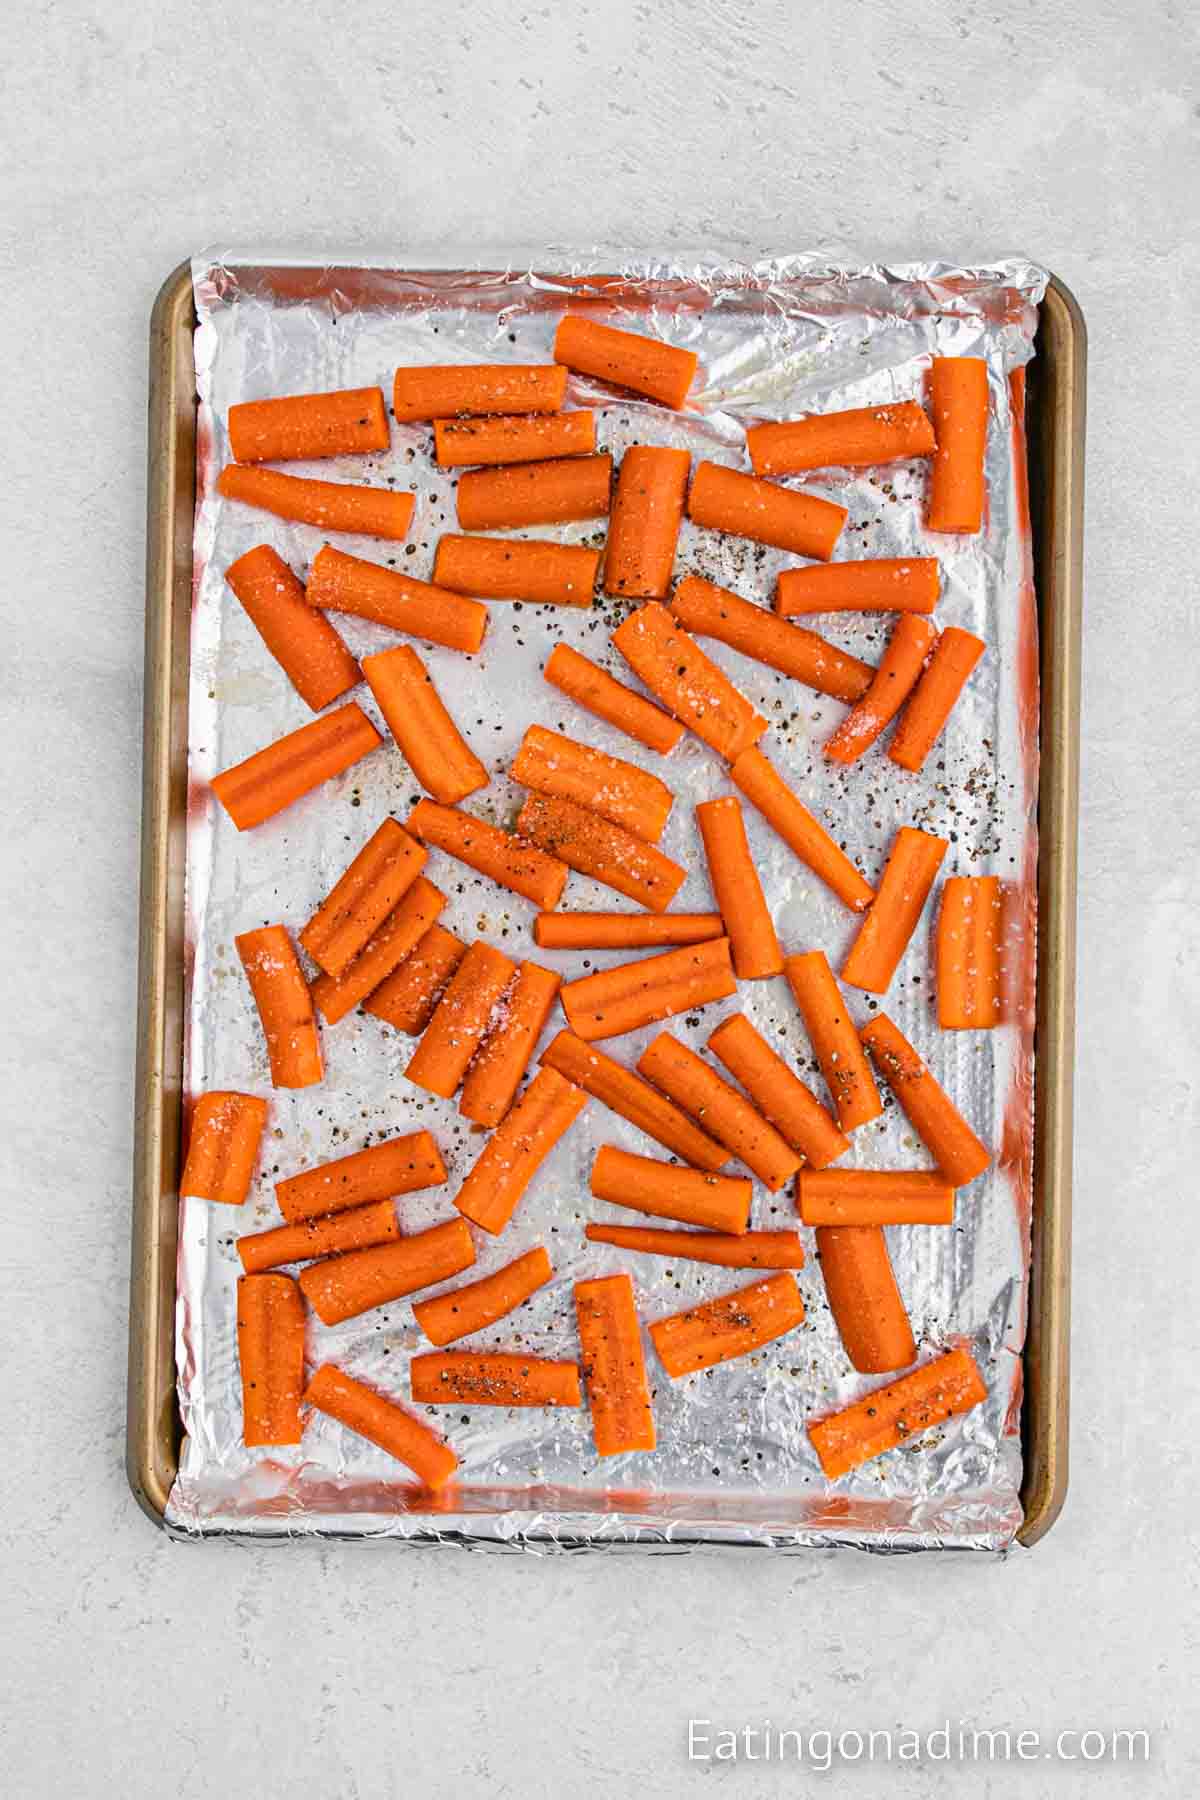 Adding the seasoning to the carrots